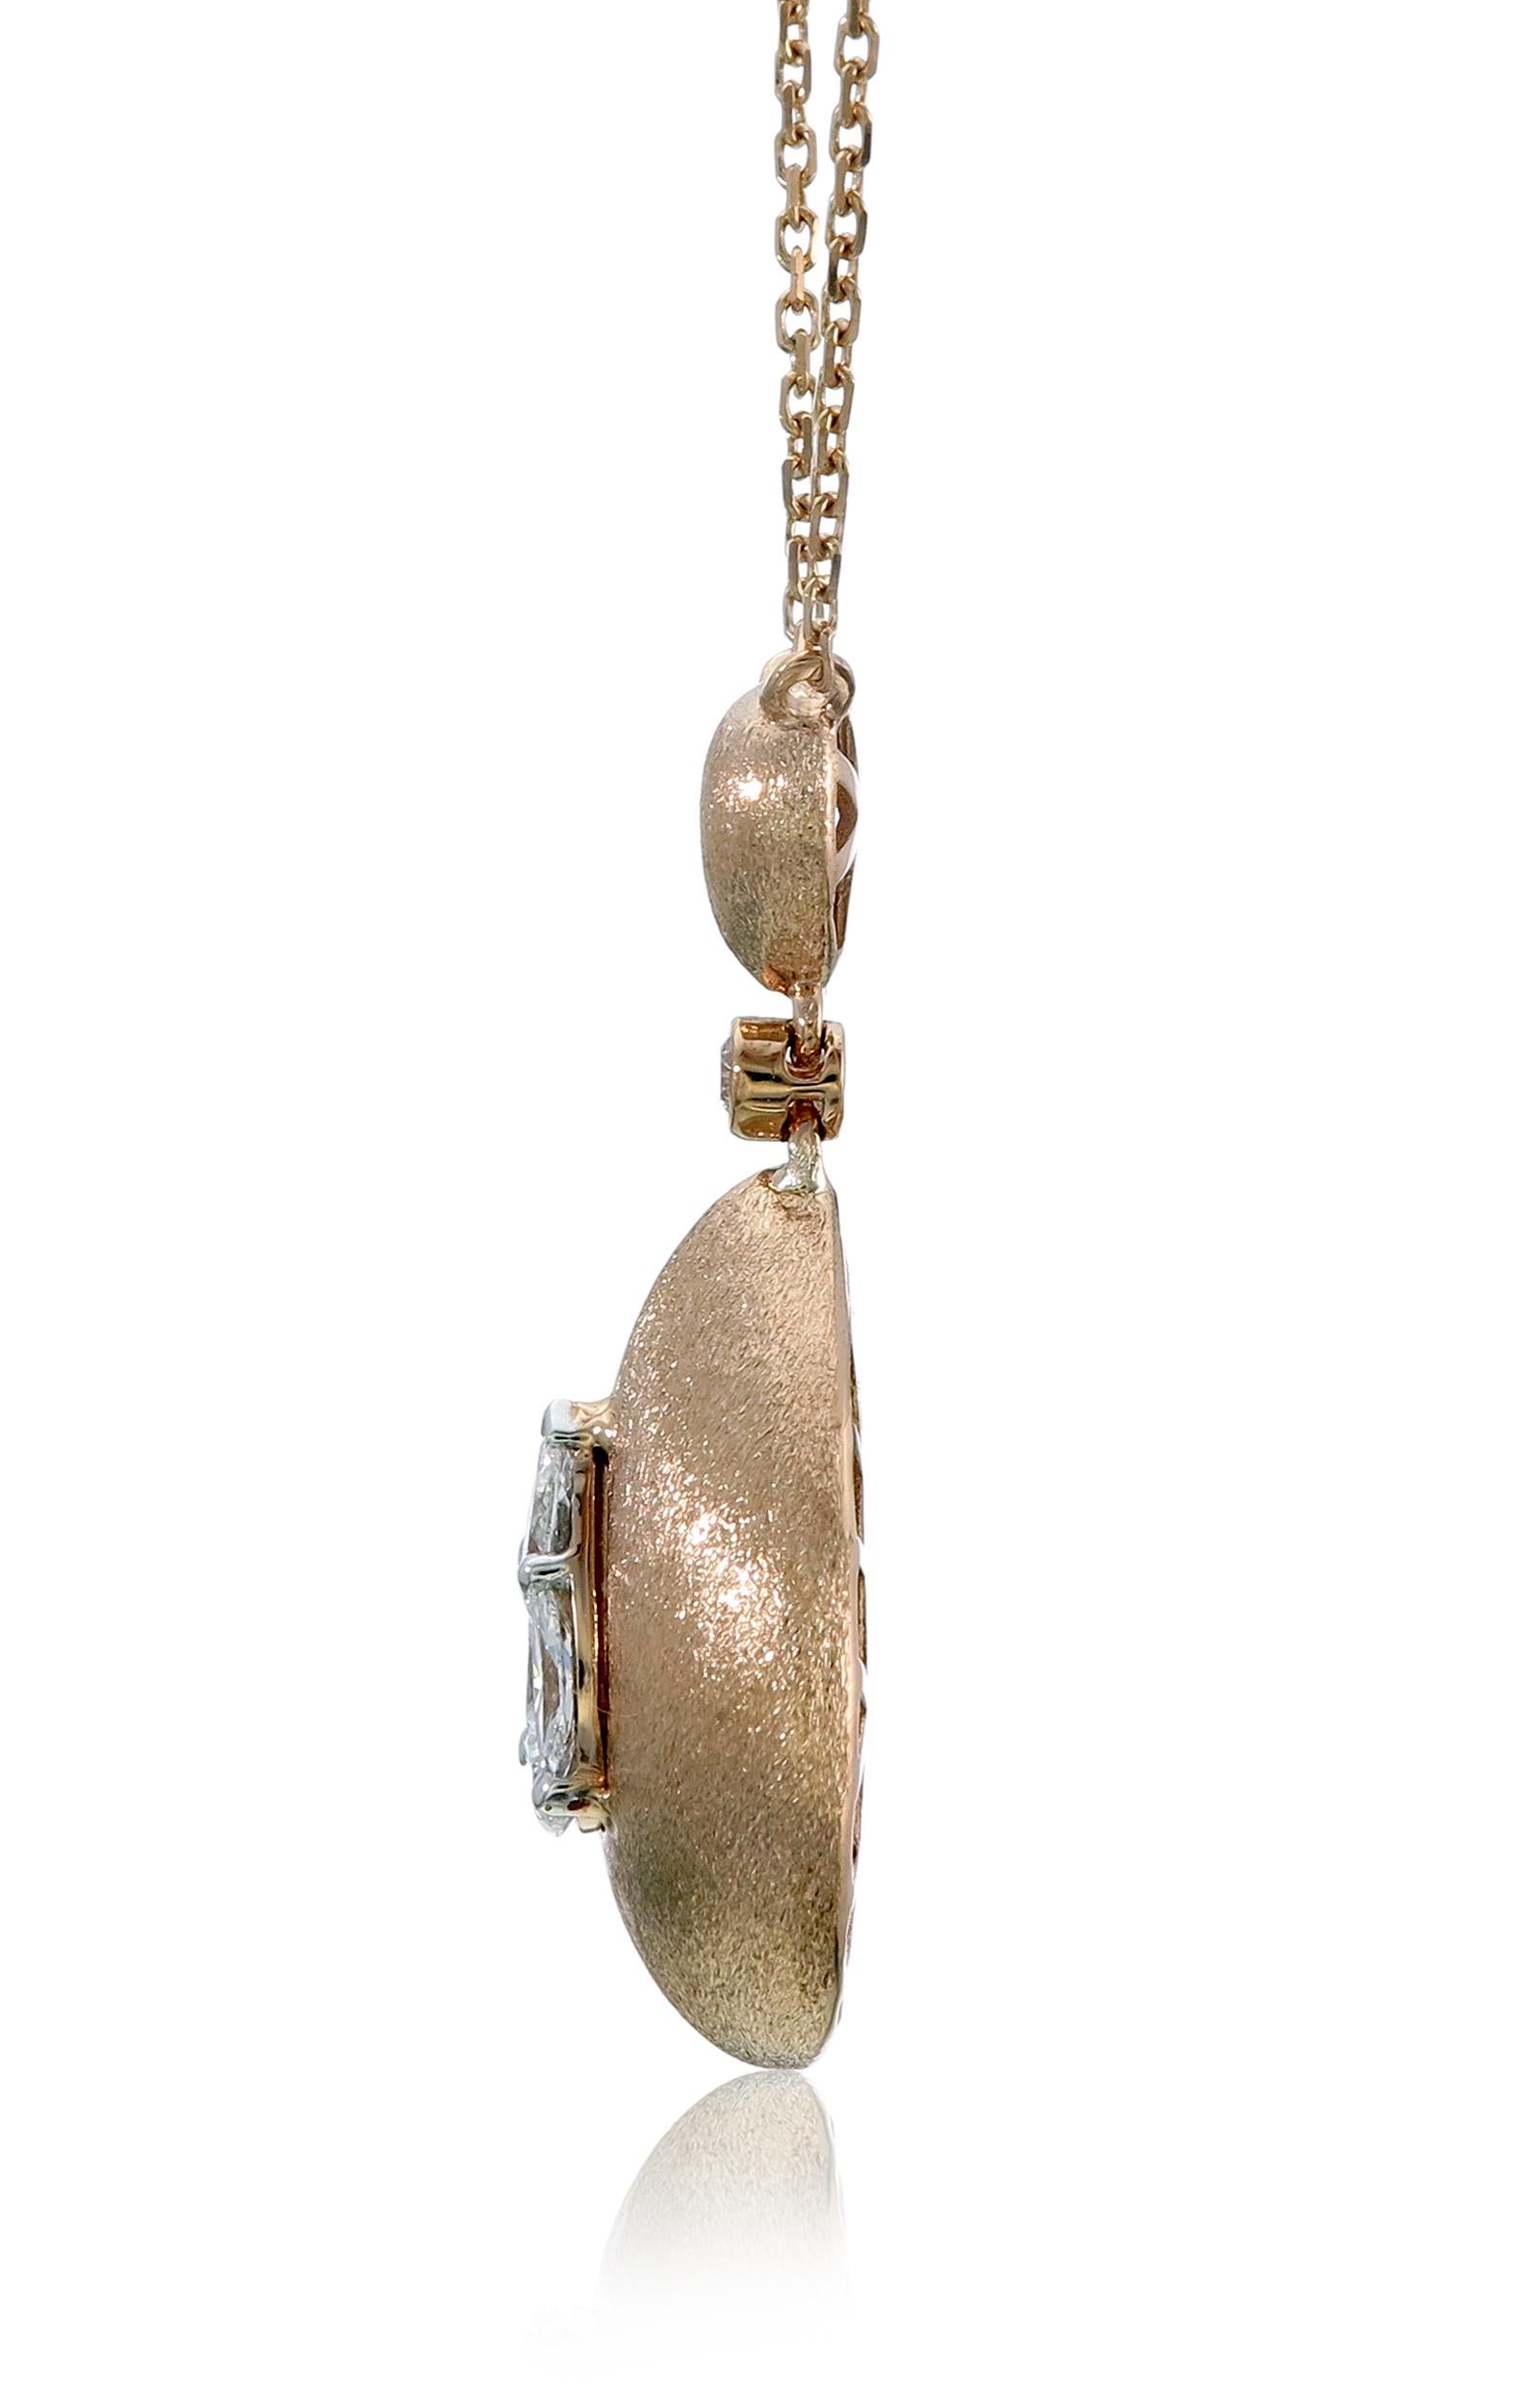 This 18K Rose Gold cocktail Pendant Necklace features a luscious Pear shape White Diamond appx. 1.25cts Illusion. Each diamond hand-selected by our experts for its superior luster and surface quality. Combine with glamorous outfits for a